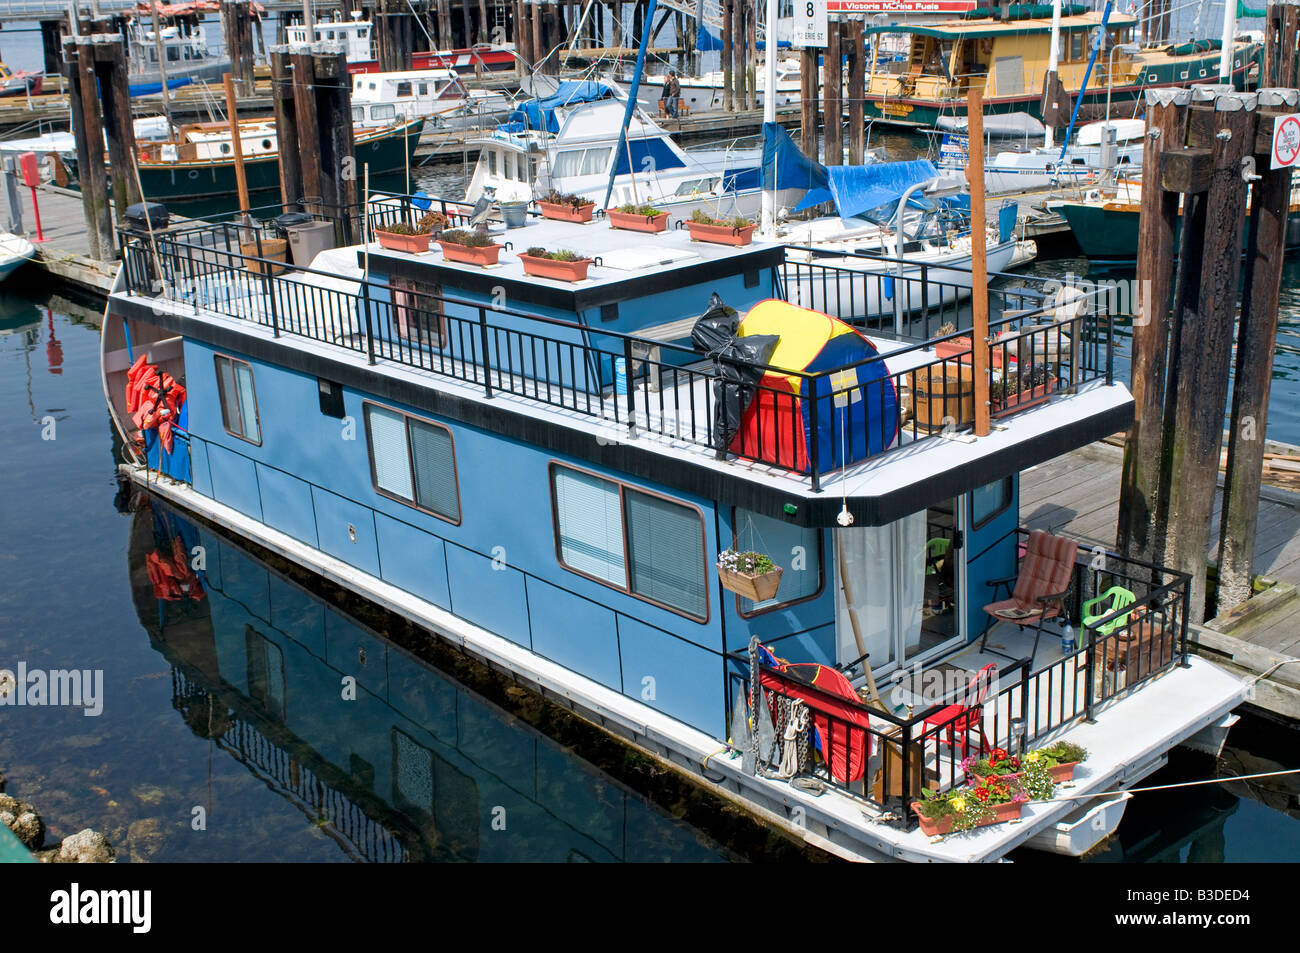 Victoria House Boot Schwimmer Immobilien British Columbia BCY 0684 Stockfoto